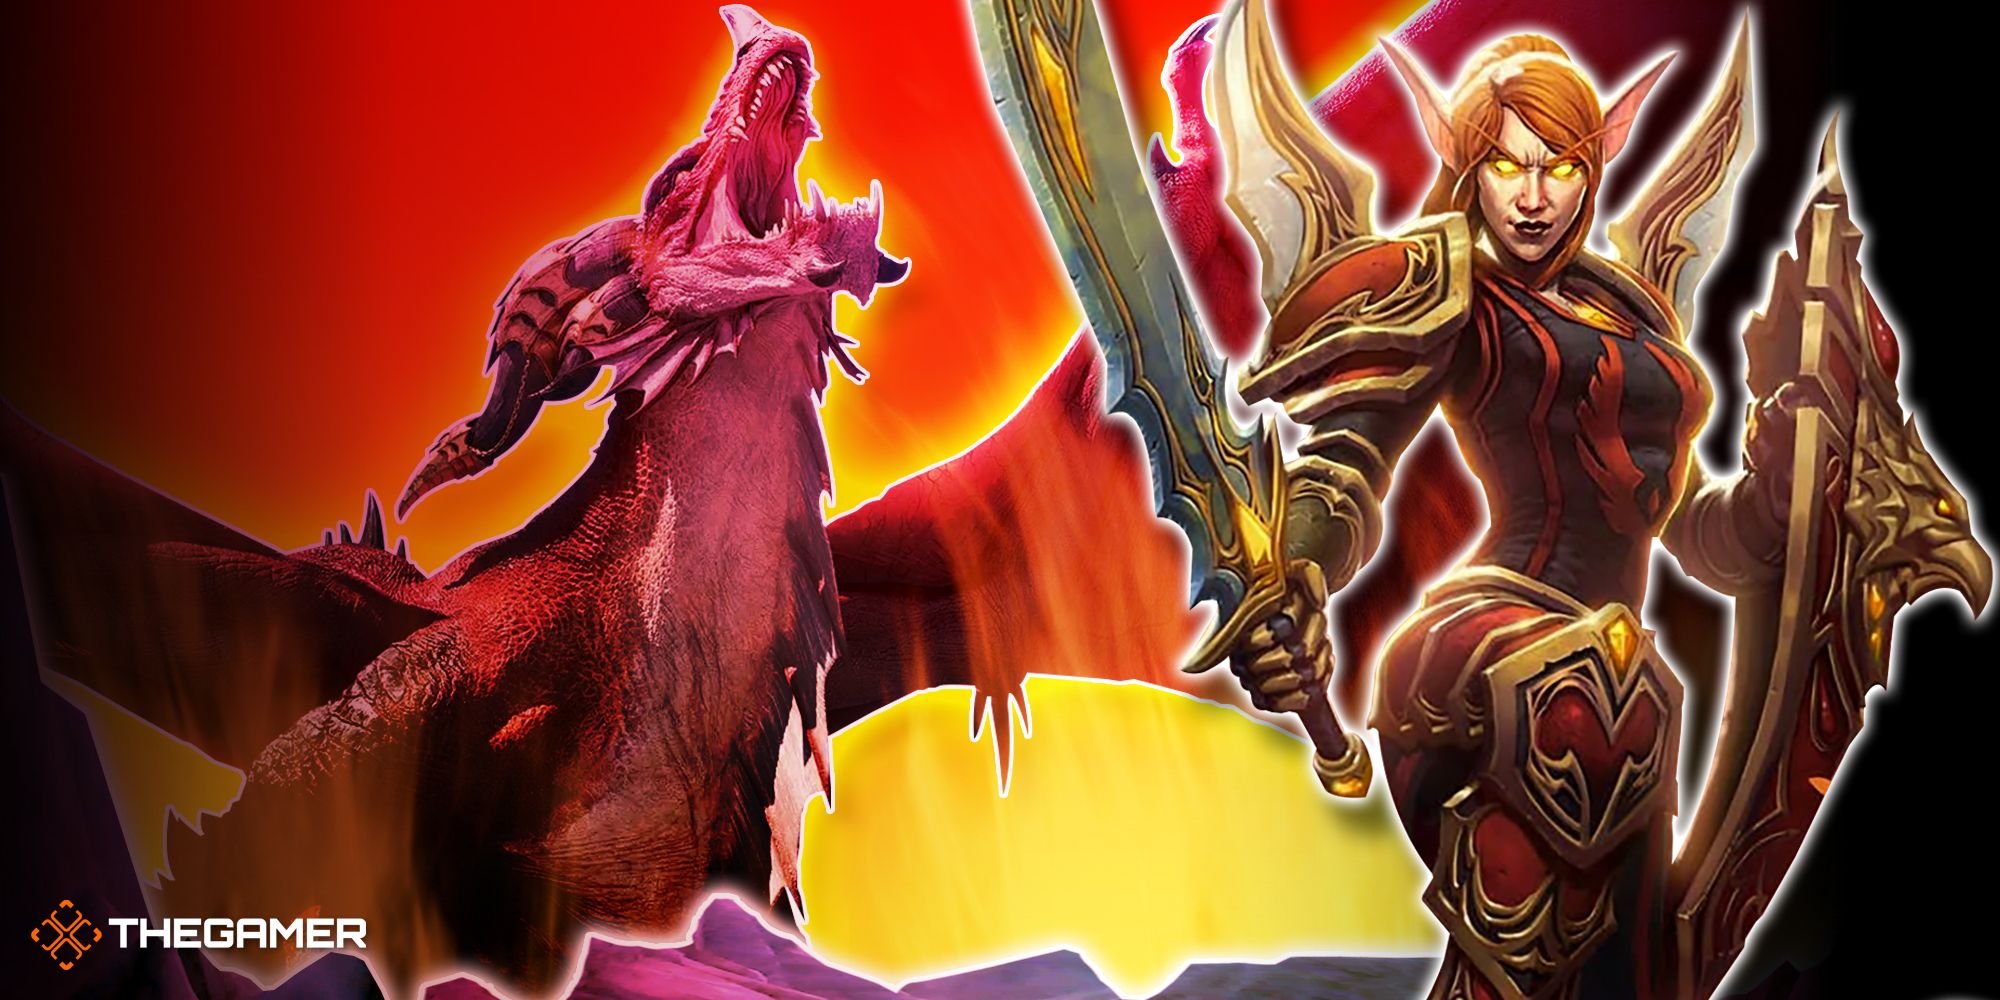 7-World of Warcraft Dragonflight-Holy Paladin Complete Guide Liadrin as a protection Paladin